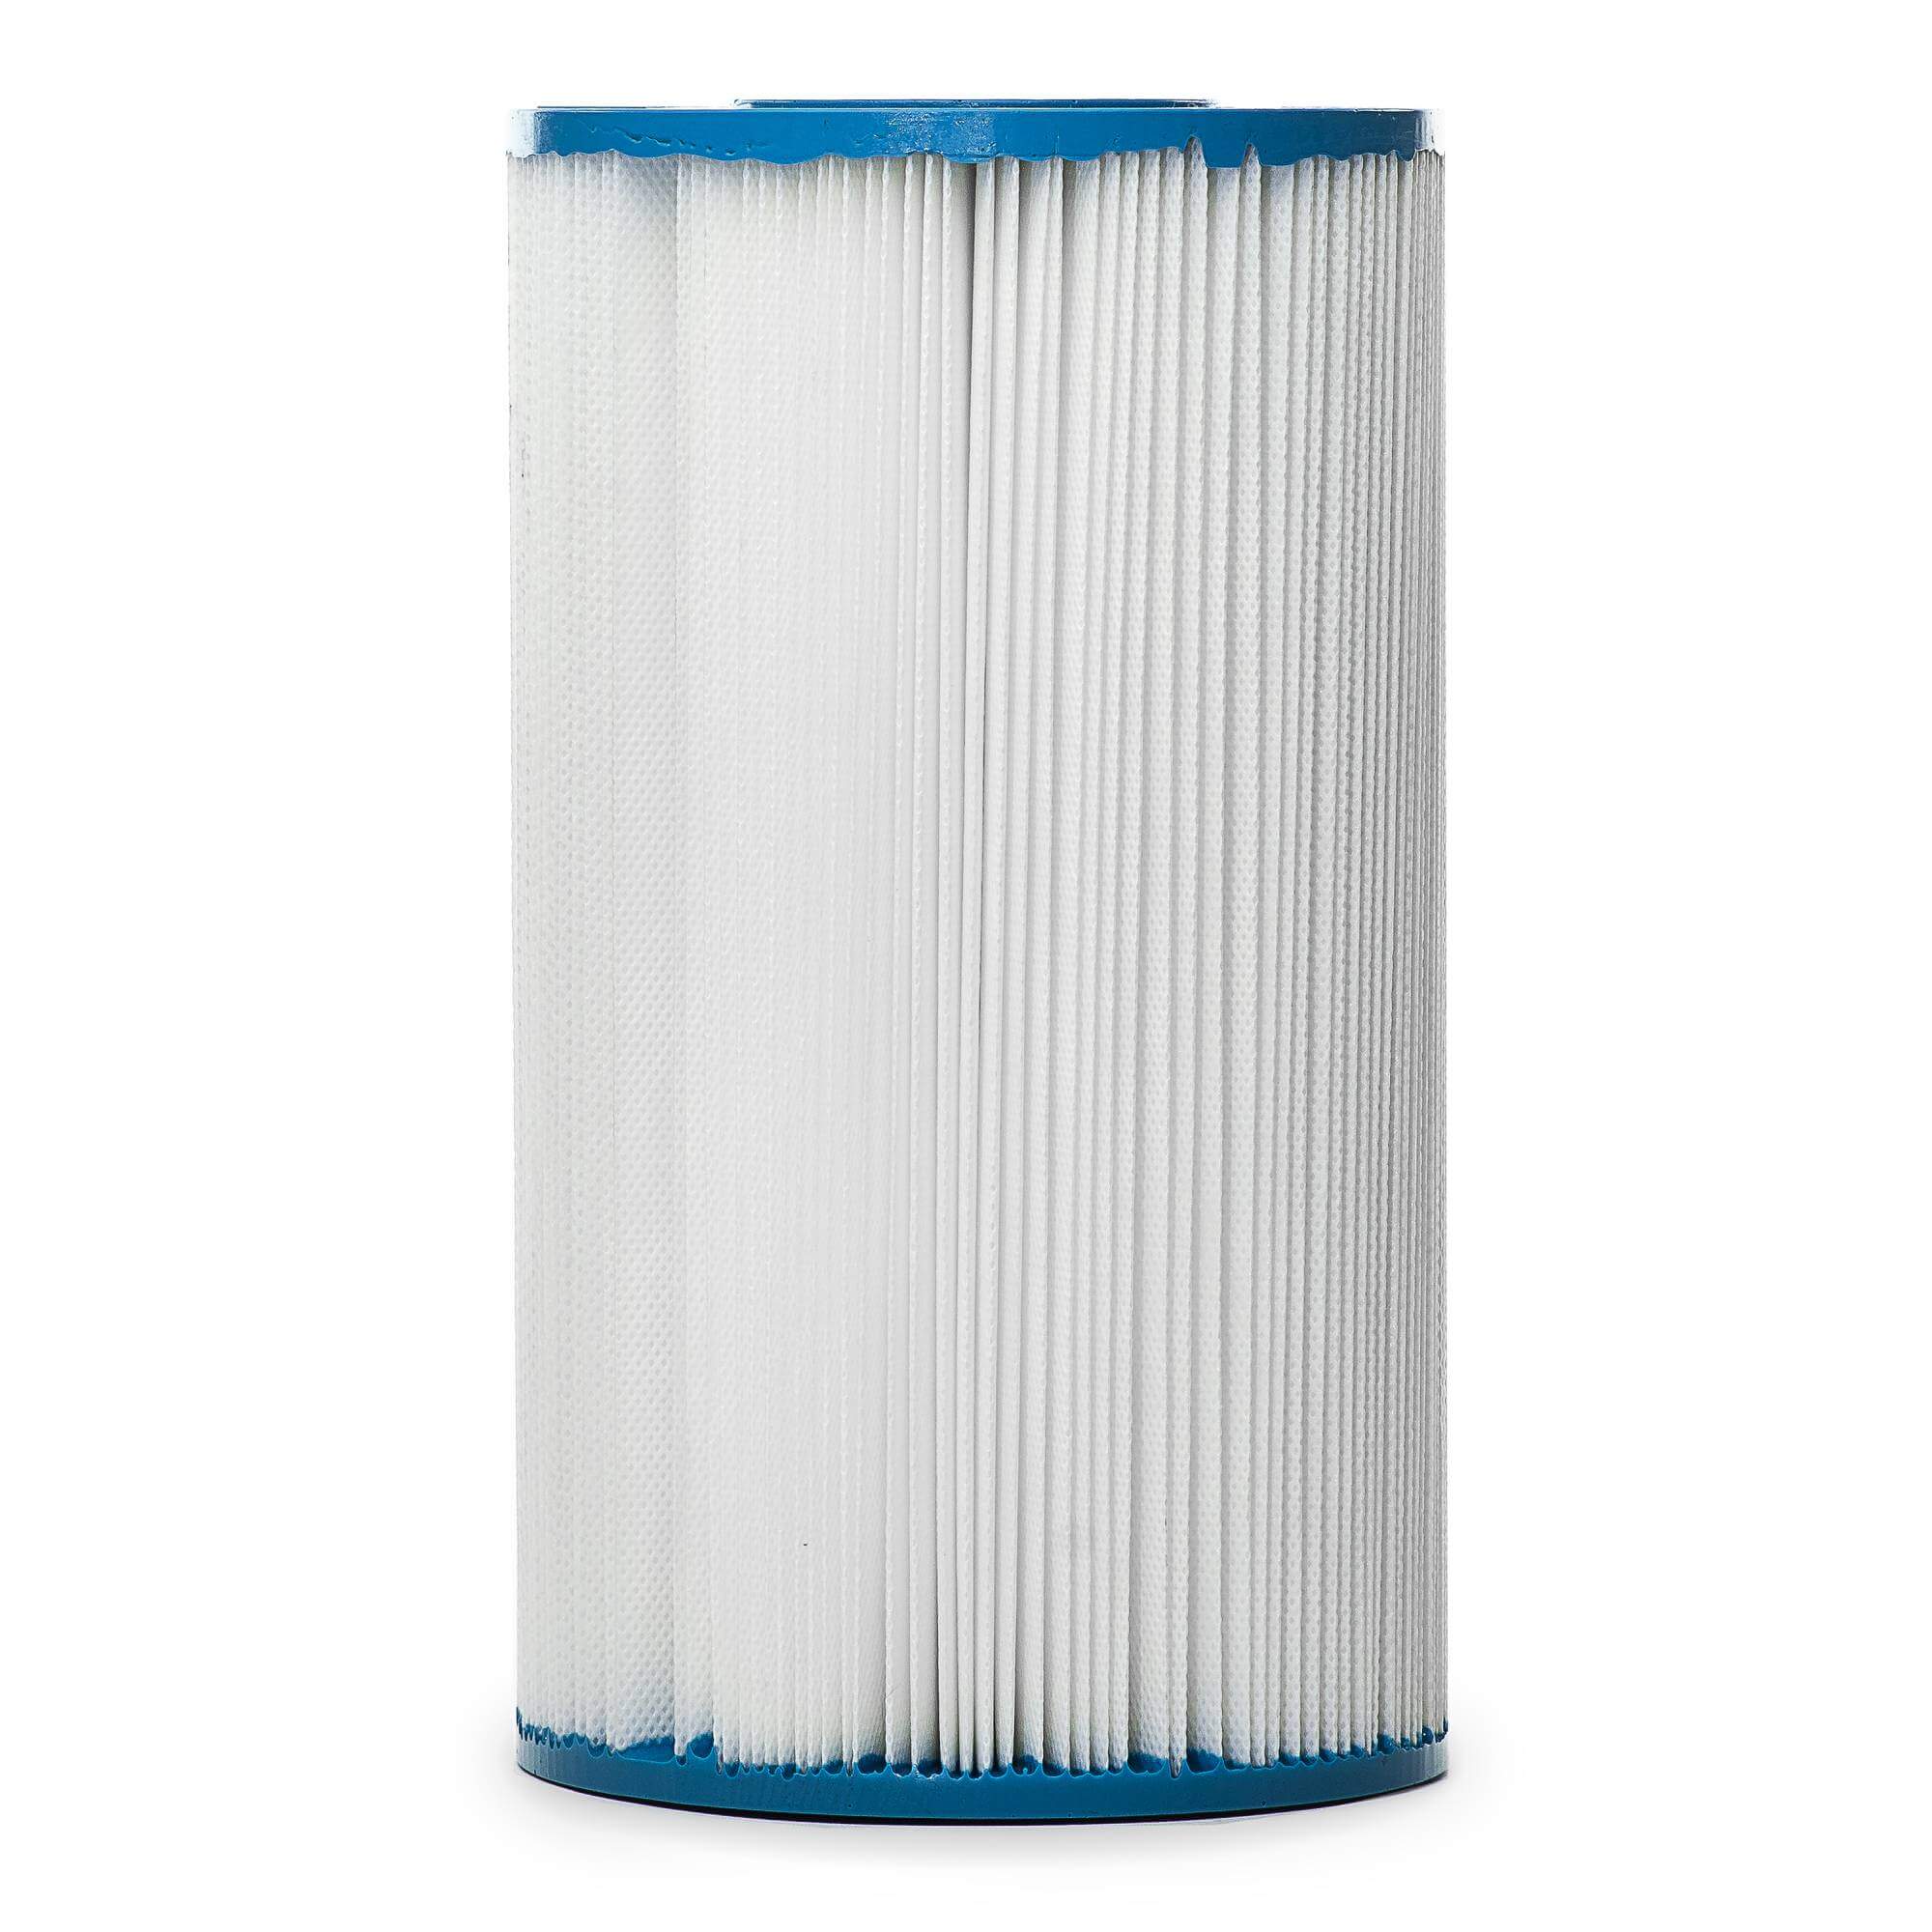 Filters Fast&reg; FF-0141 Replacement For Aladdin 13004